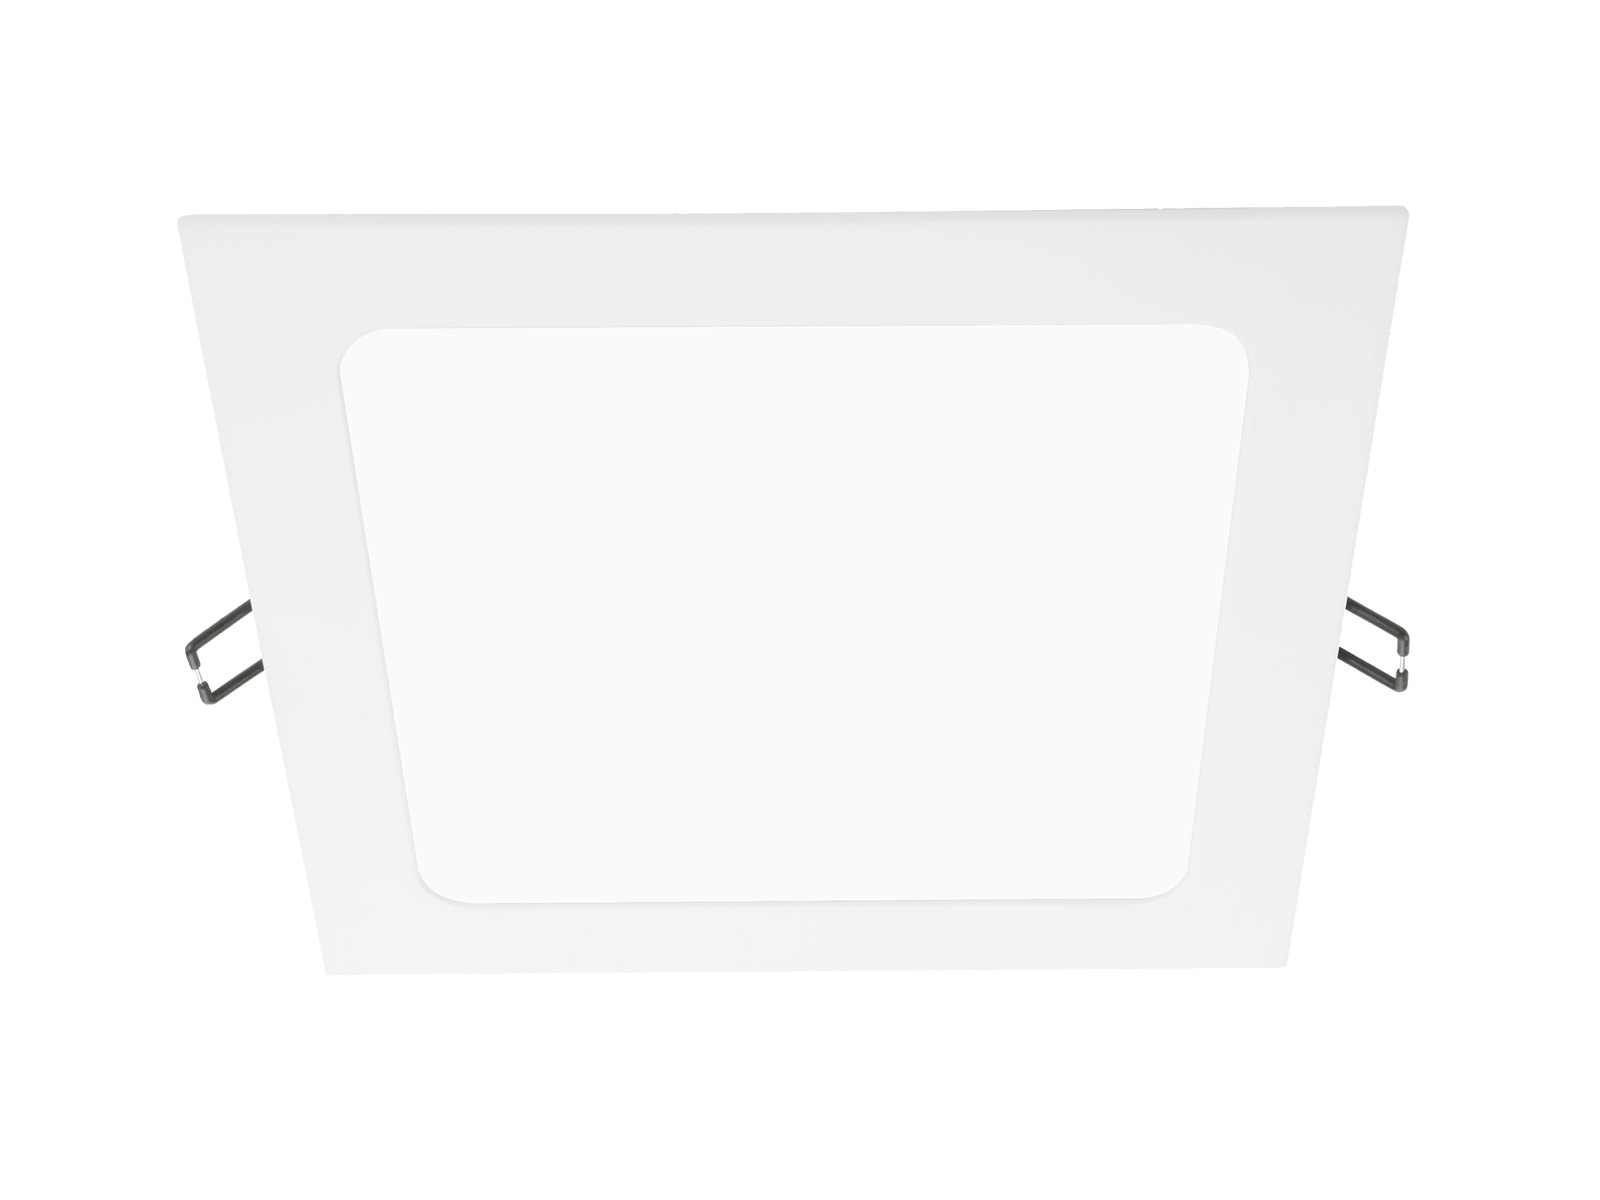 PL DD residential square light diffuser panel